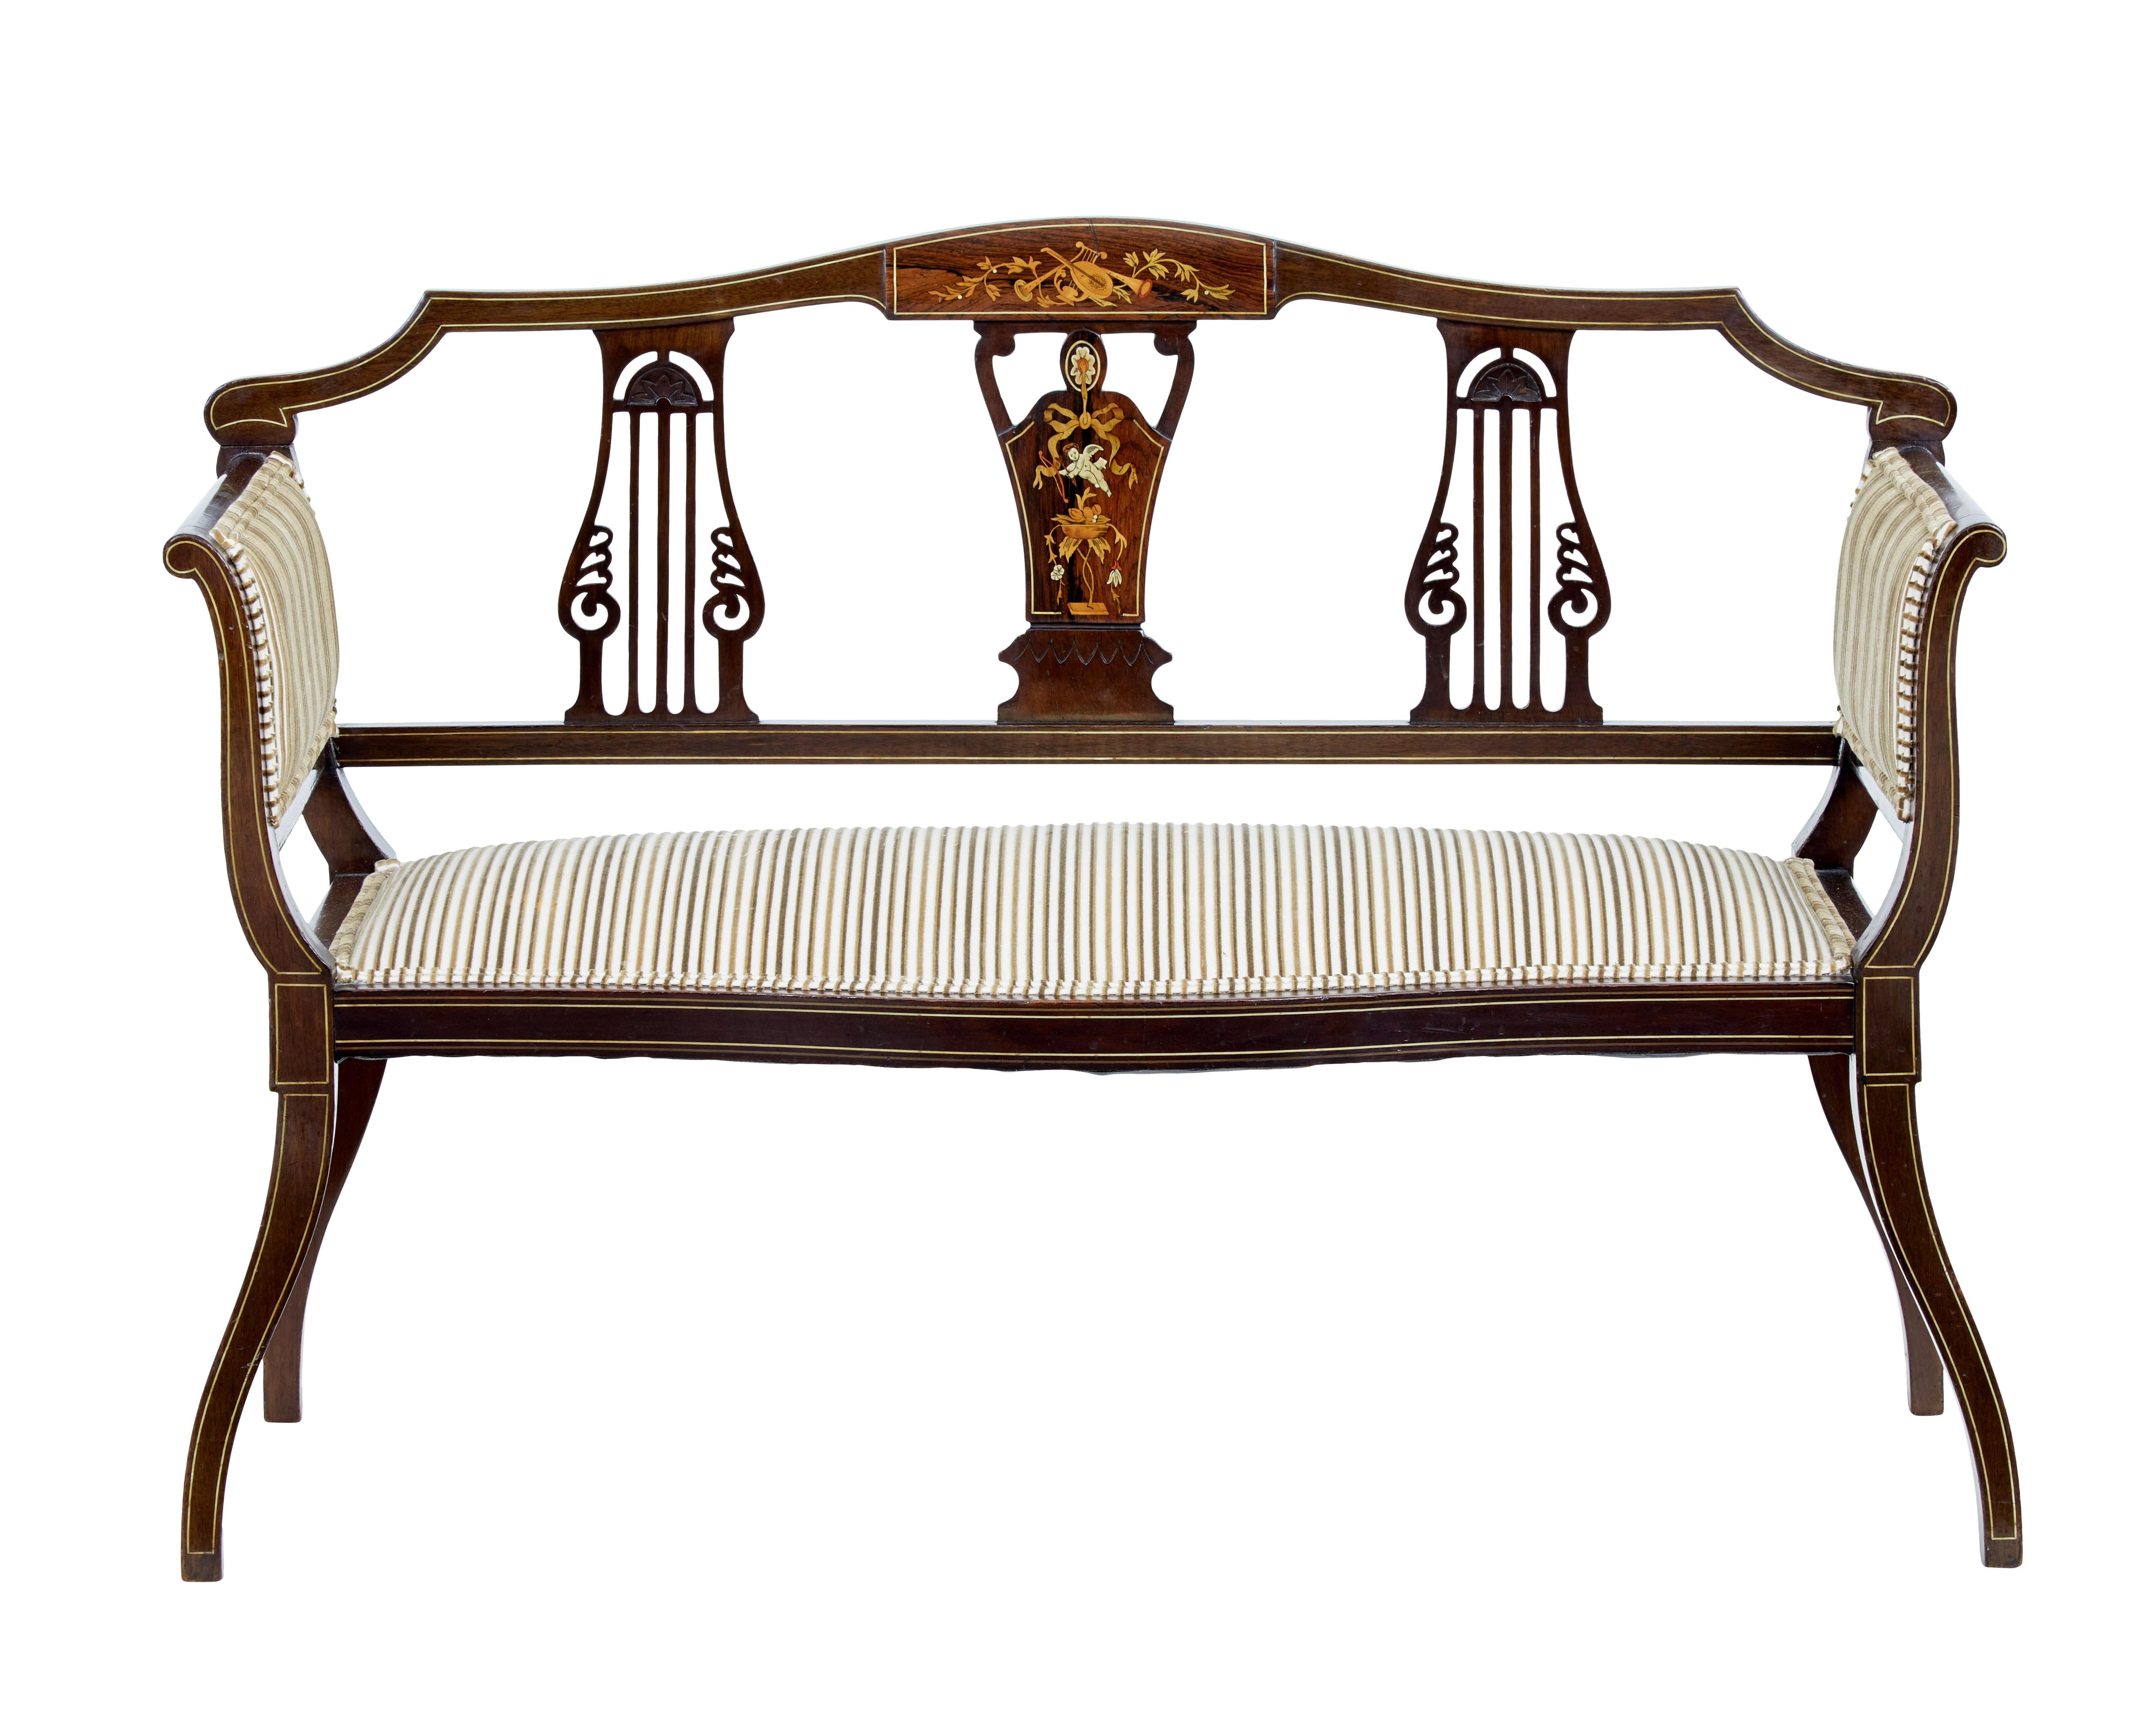 Petit Edwardian salon sofa, circa 1910.

Open back sofa featuring an inlaid backrest. Inlay shows musical instruments, cherub and swags.

Later upholstery in good condition.

Minor surface marks to woodwork.